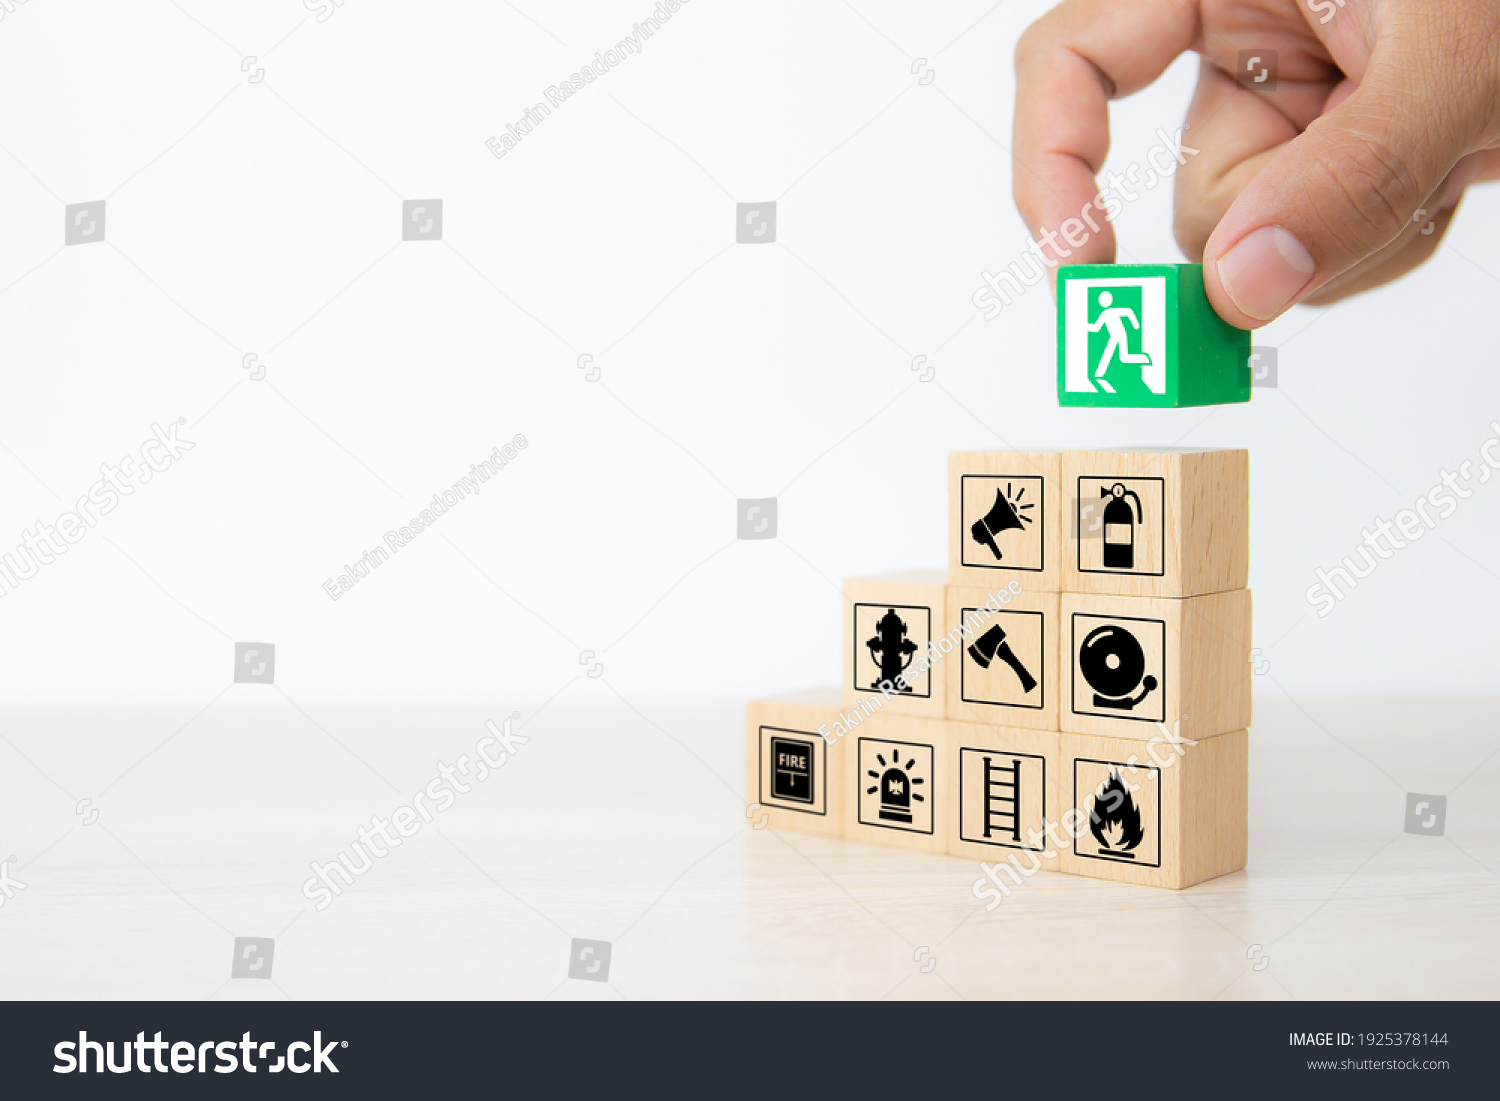 Close-up hand choose wooden toy blocks stacked with door exit sing icon with fire extinguisher and fire protection symbol for safety prevent and protect accident of emergency and rescue. #1925378144